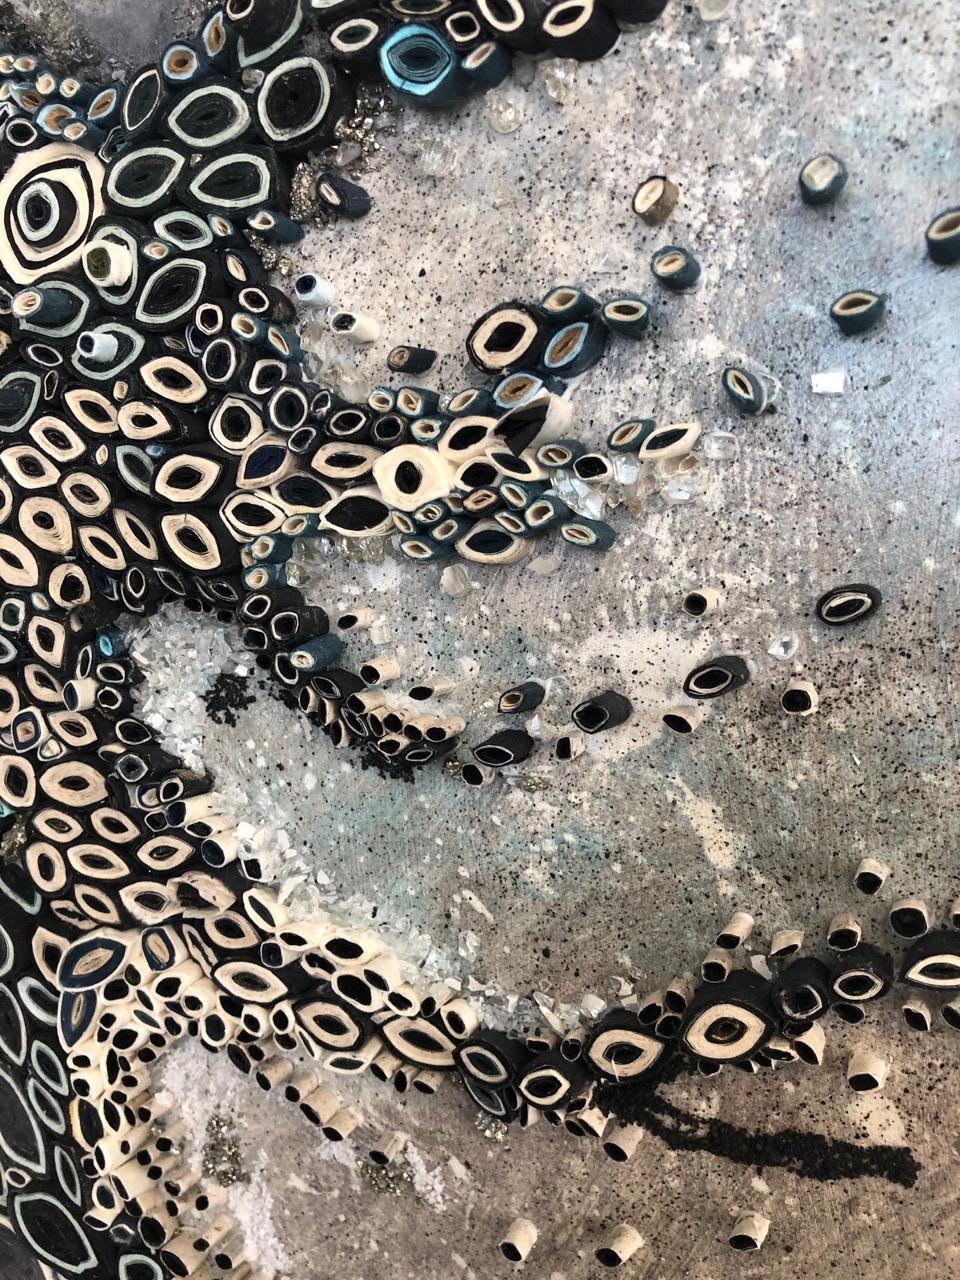 This multi media silver, gray and blue work is by Amy Genser. This dimensional paper collages consists of paper, acrylic, pyrite, sand and mica on sintra. These colorful, textural, one-of-a-kind wall pieces embody movement and processes. She